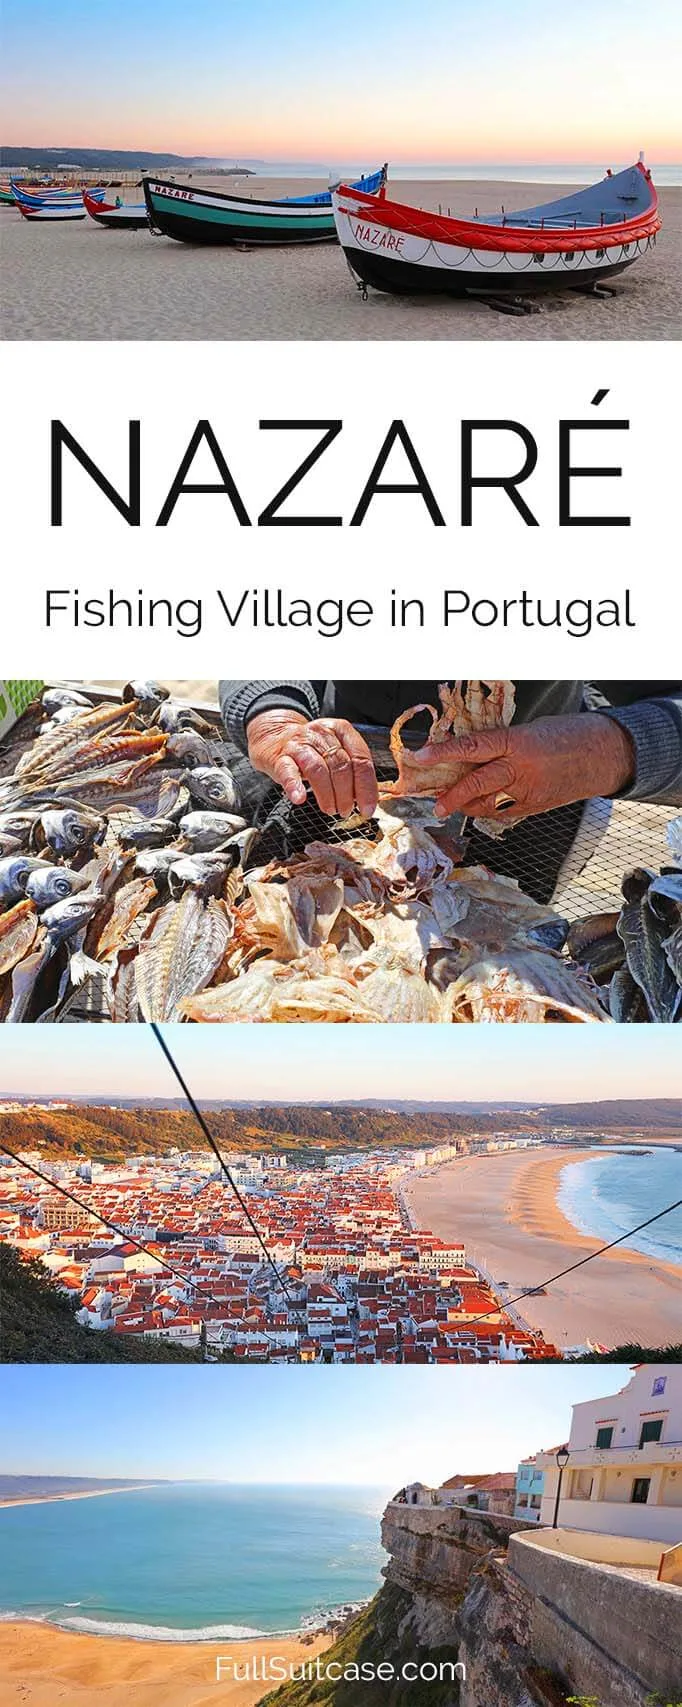 Nazare fishing village is not to be missed when traveling to Central Portugal